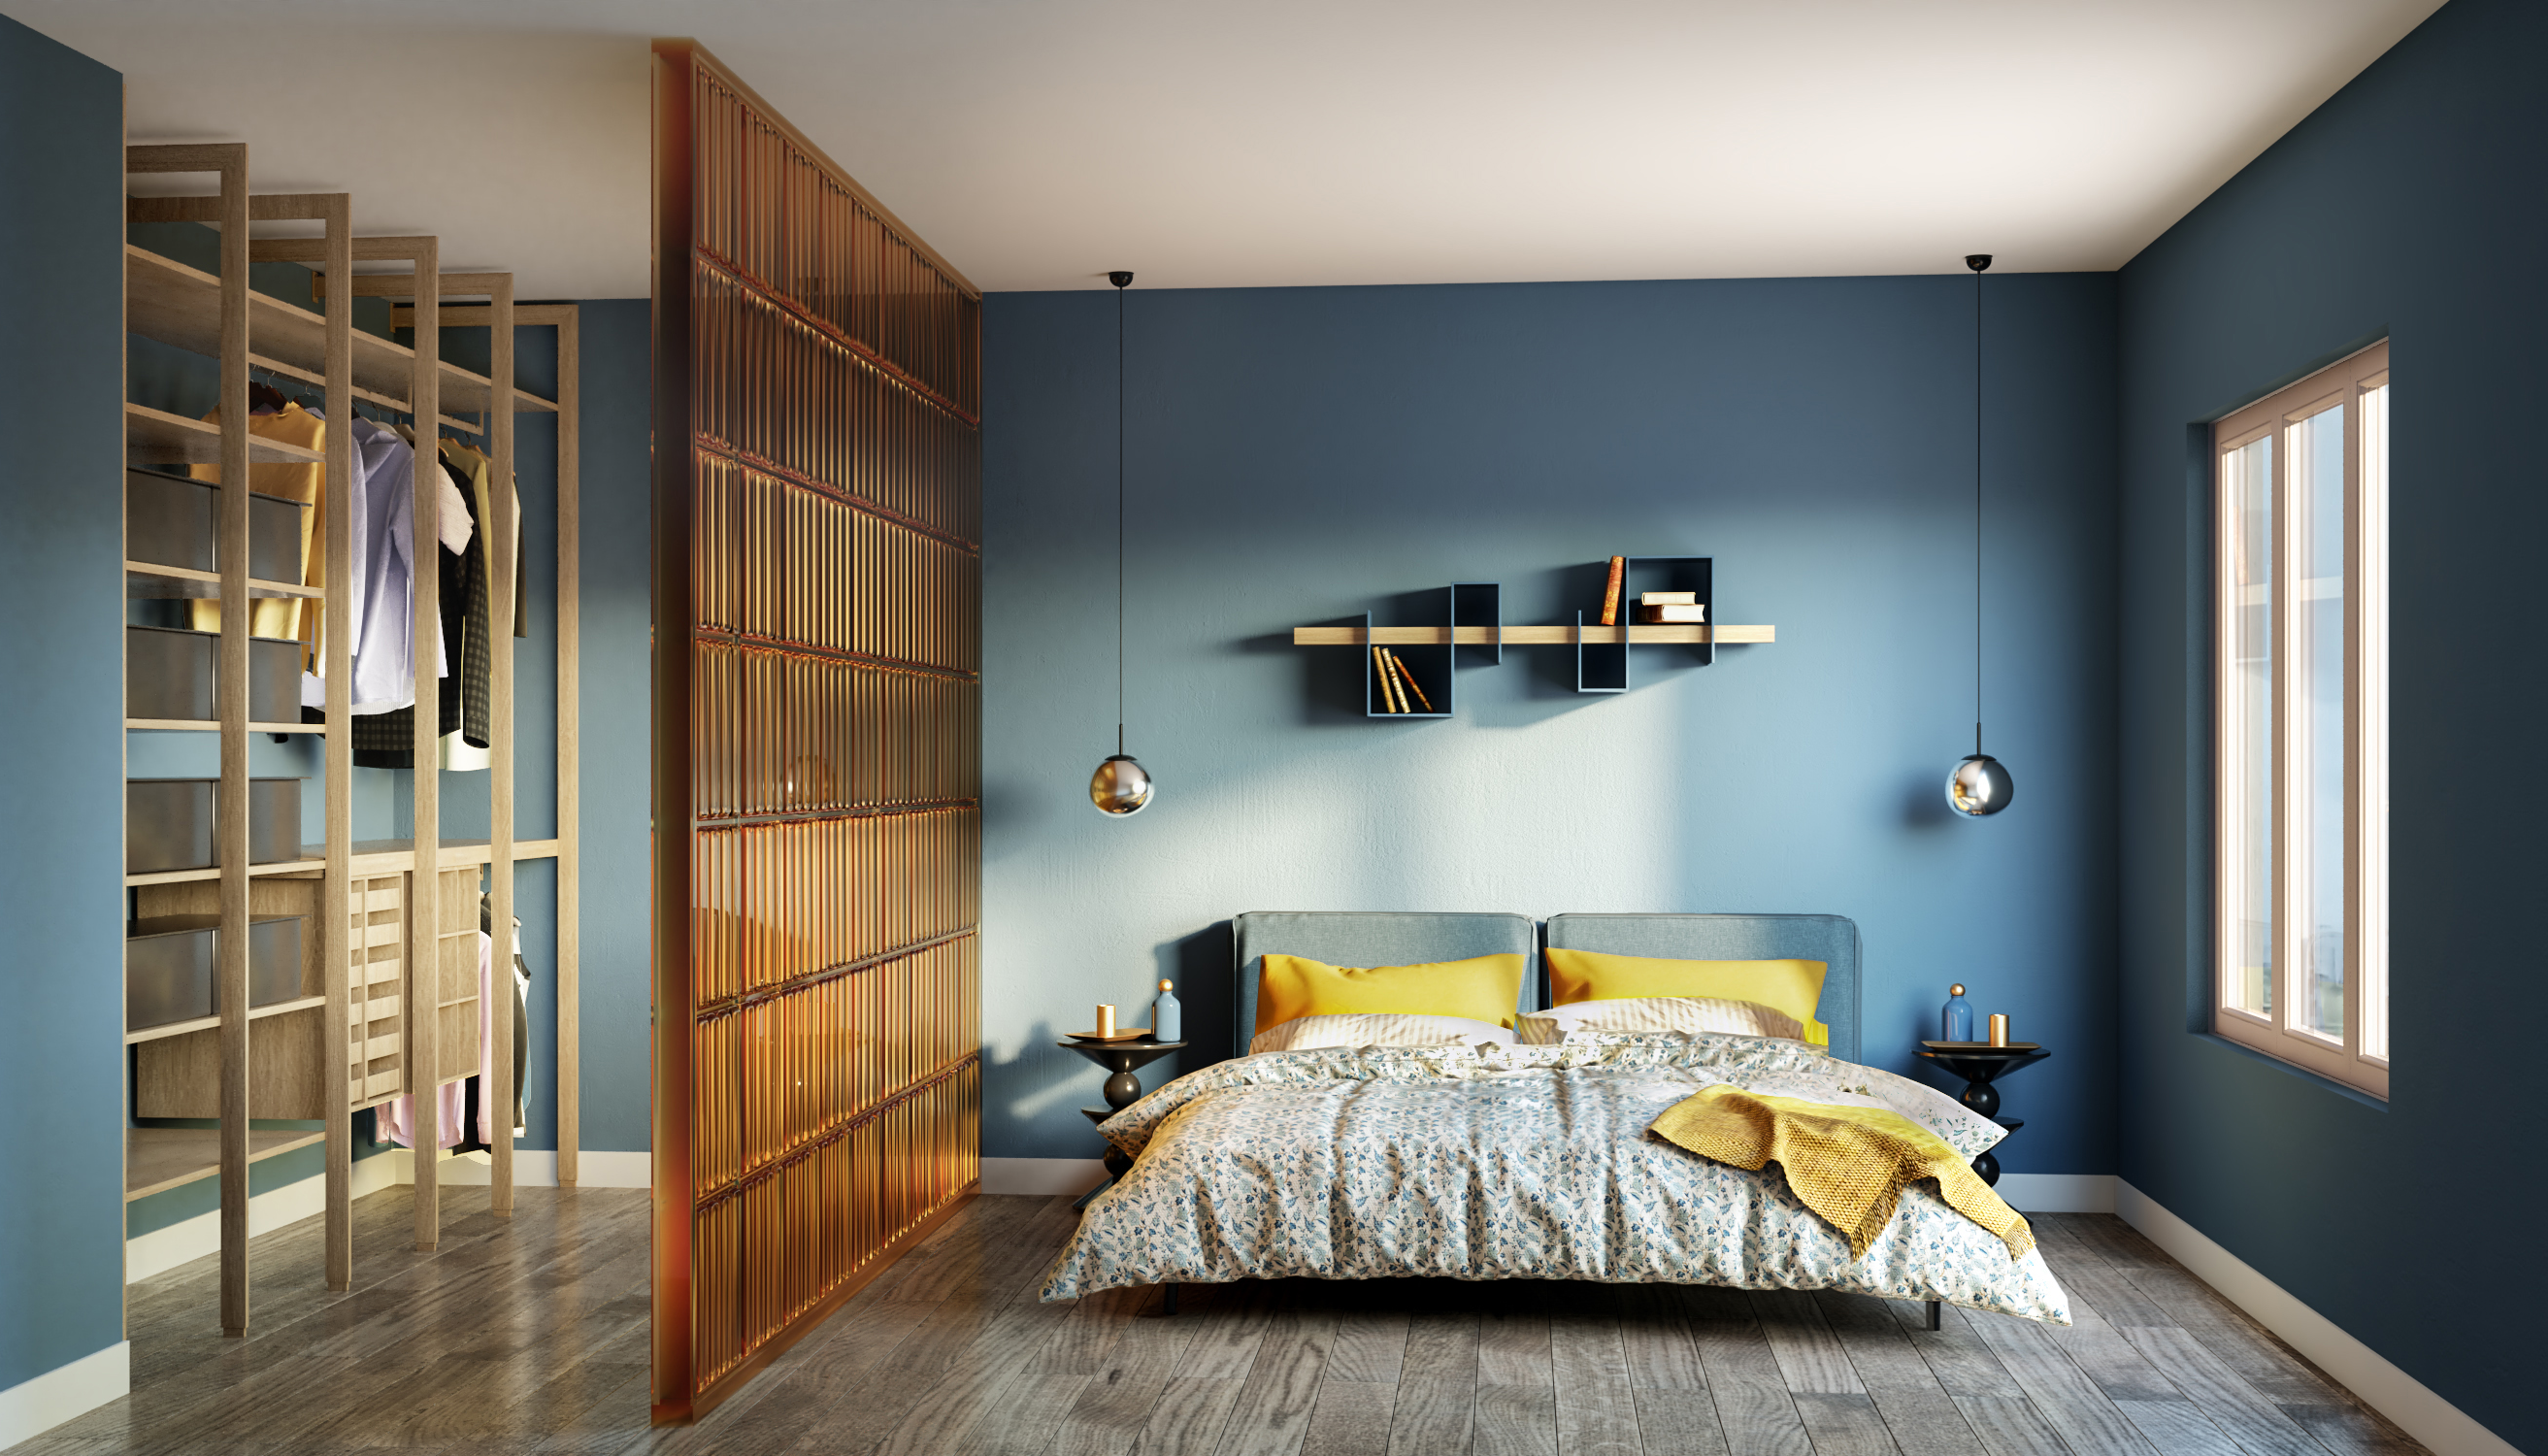 Blue and Yellow Master Bedroom Interior Design with Walk-In Wardrobe